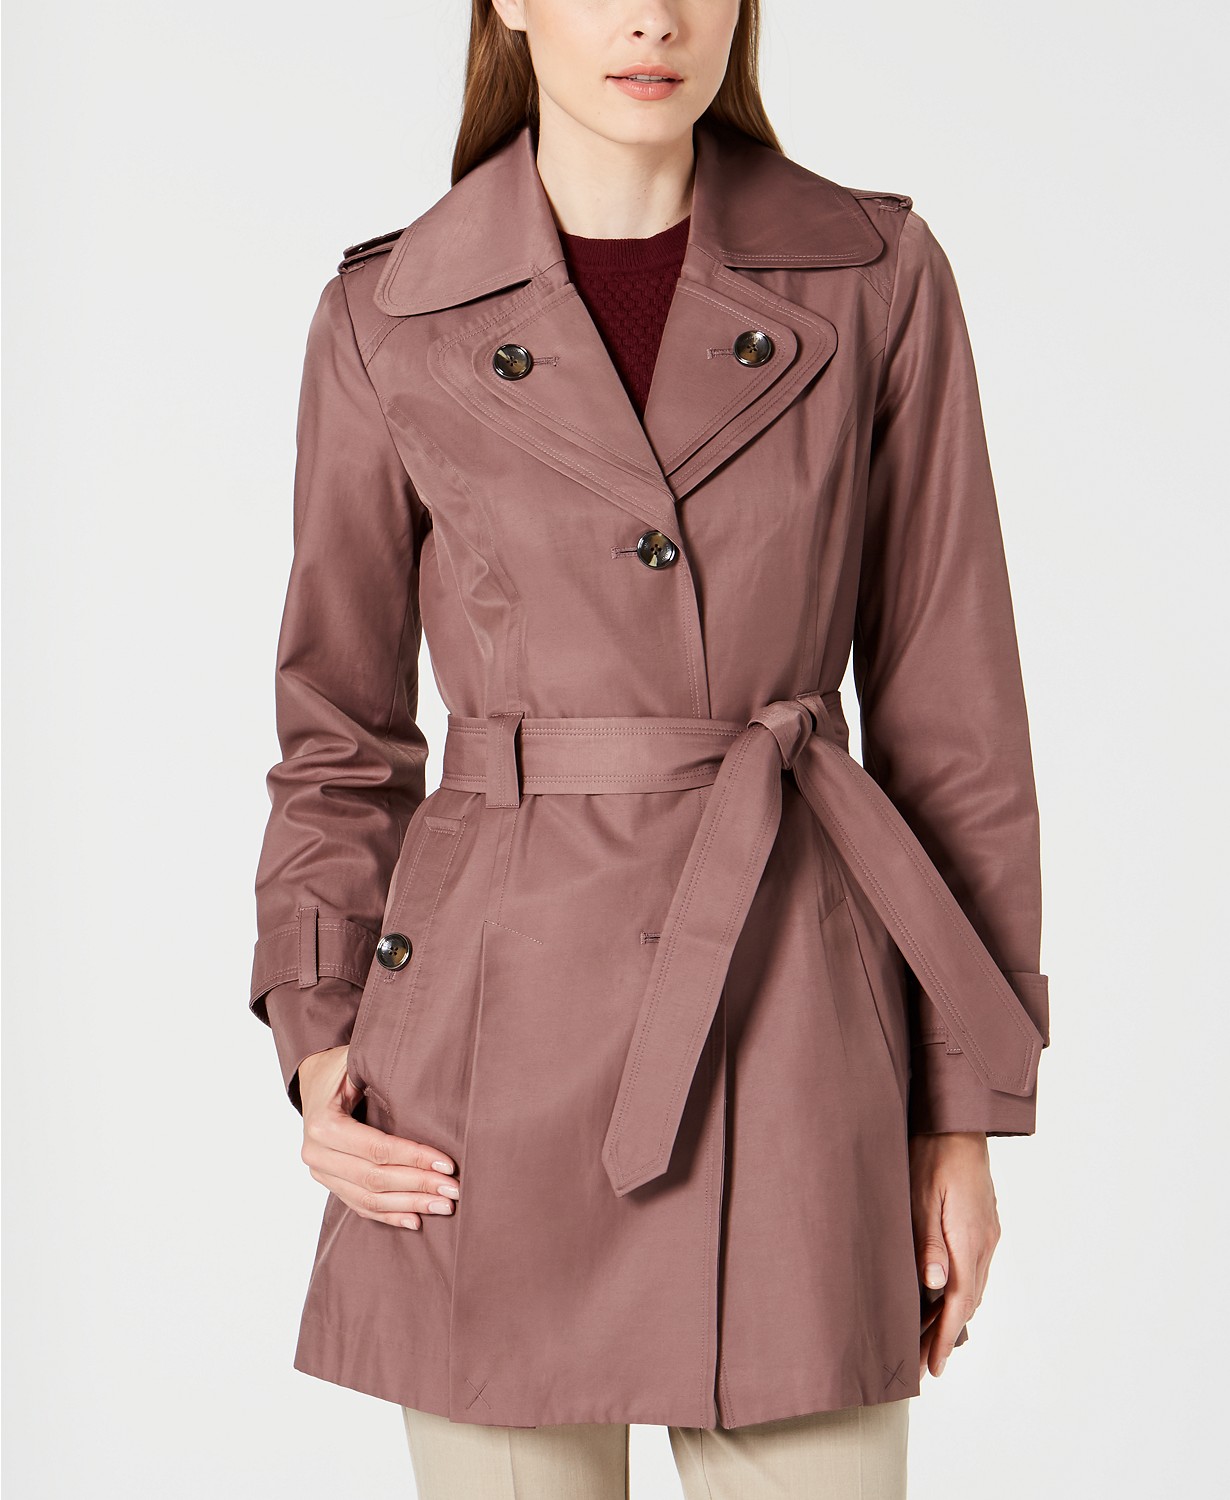 Trench Coats for Petites: 7 Steps to Find the Best Petite Trench Coat